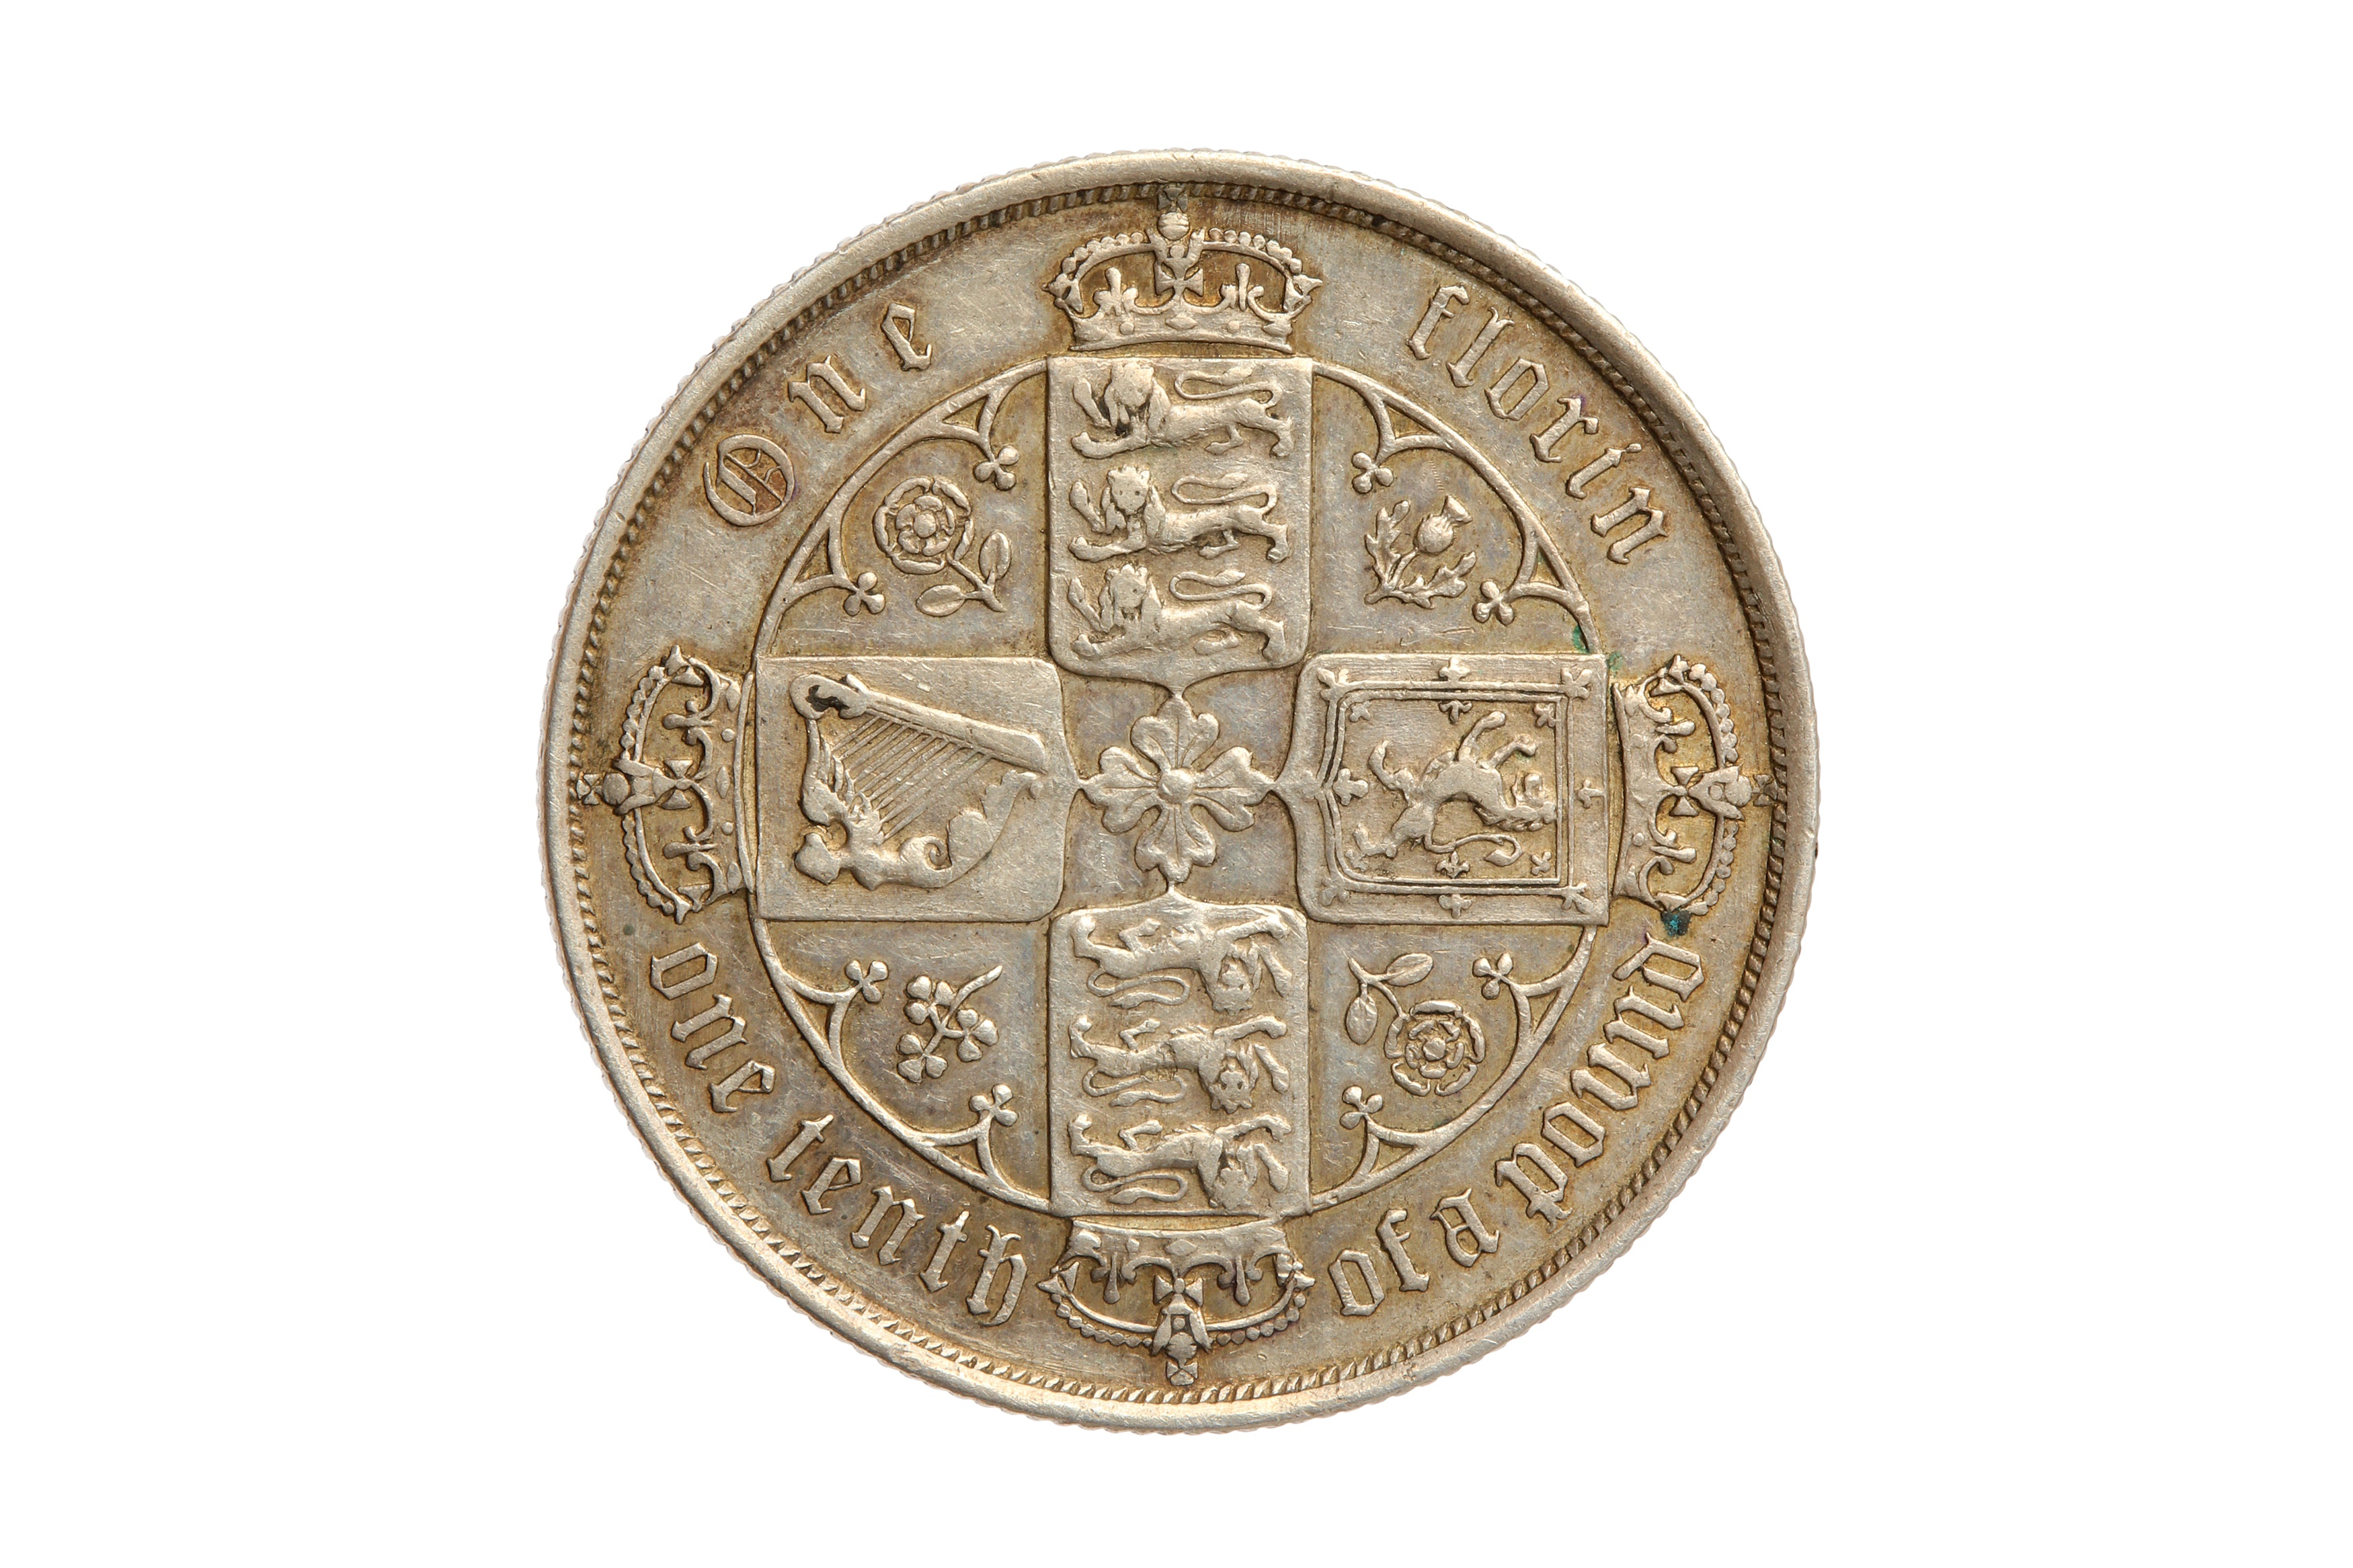 VICTORIA (1837 - 1901), 1886 'GOTHIC' FLORIN. - Image 2 of 2